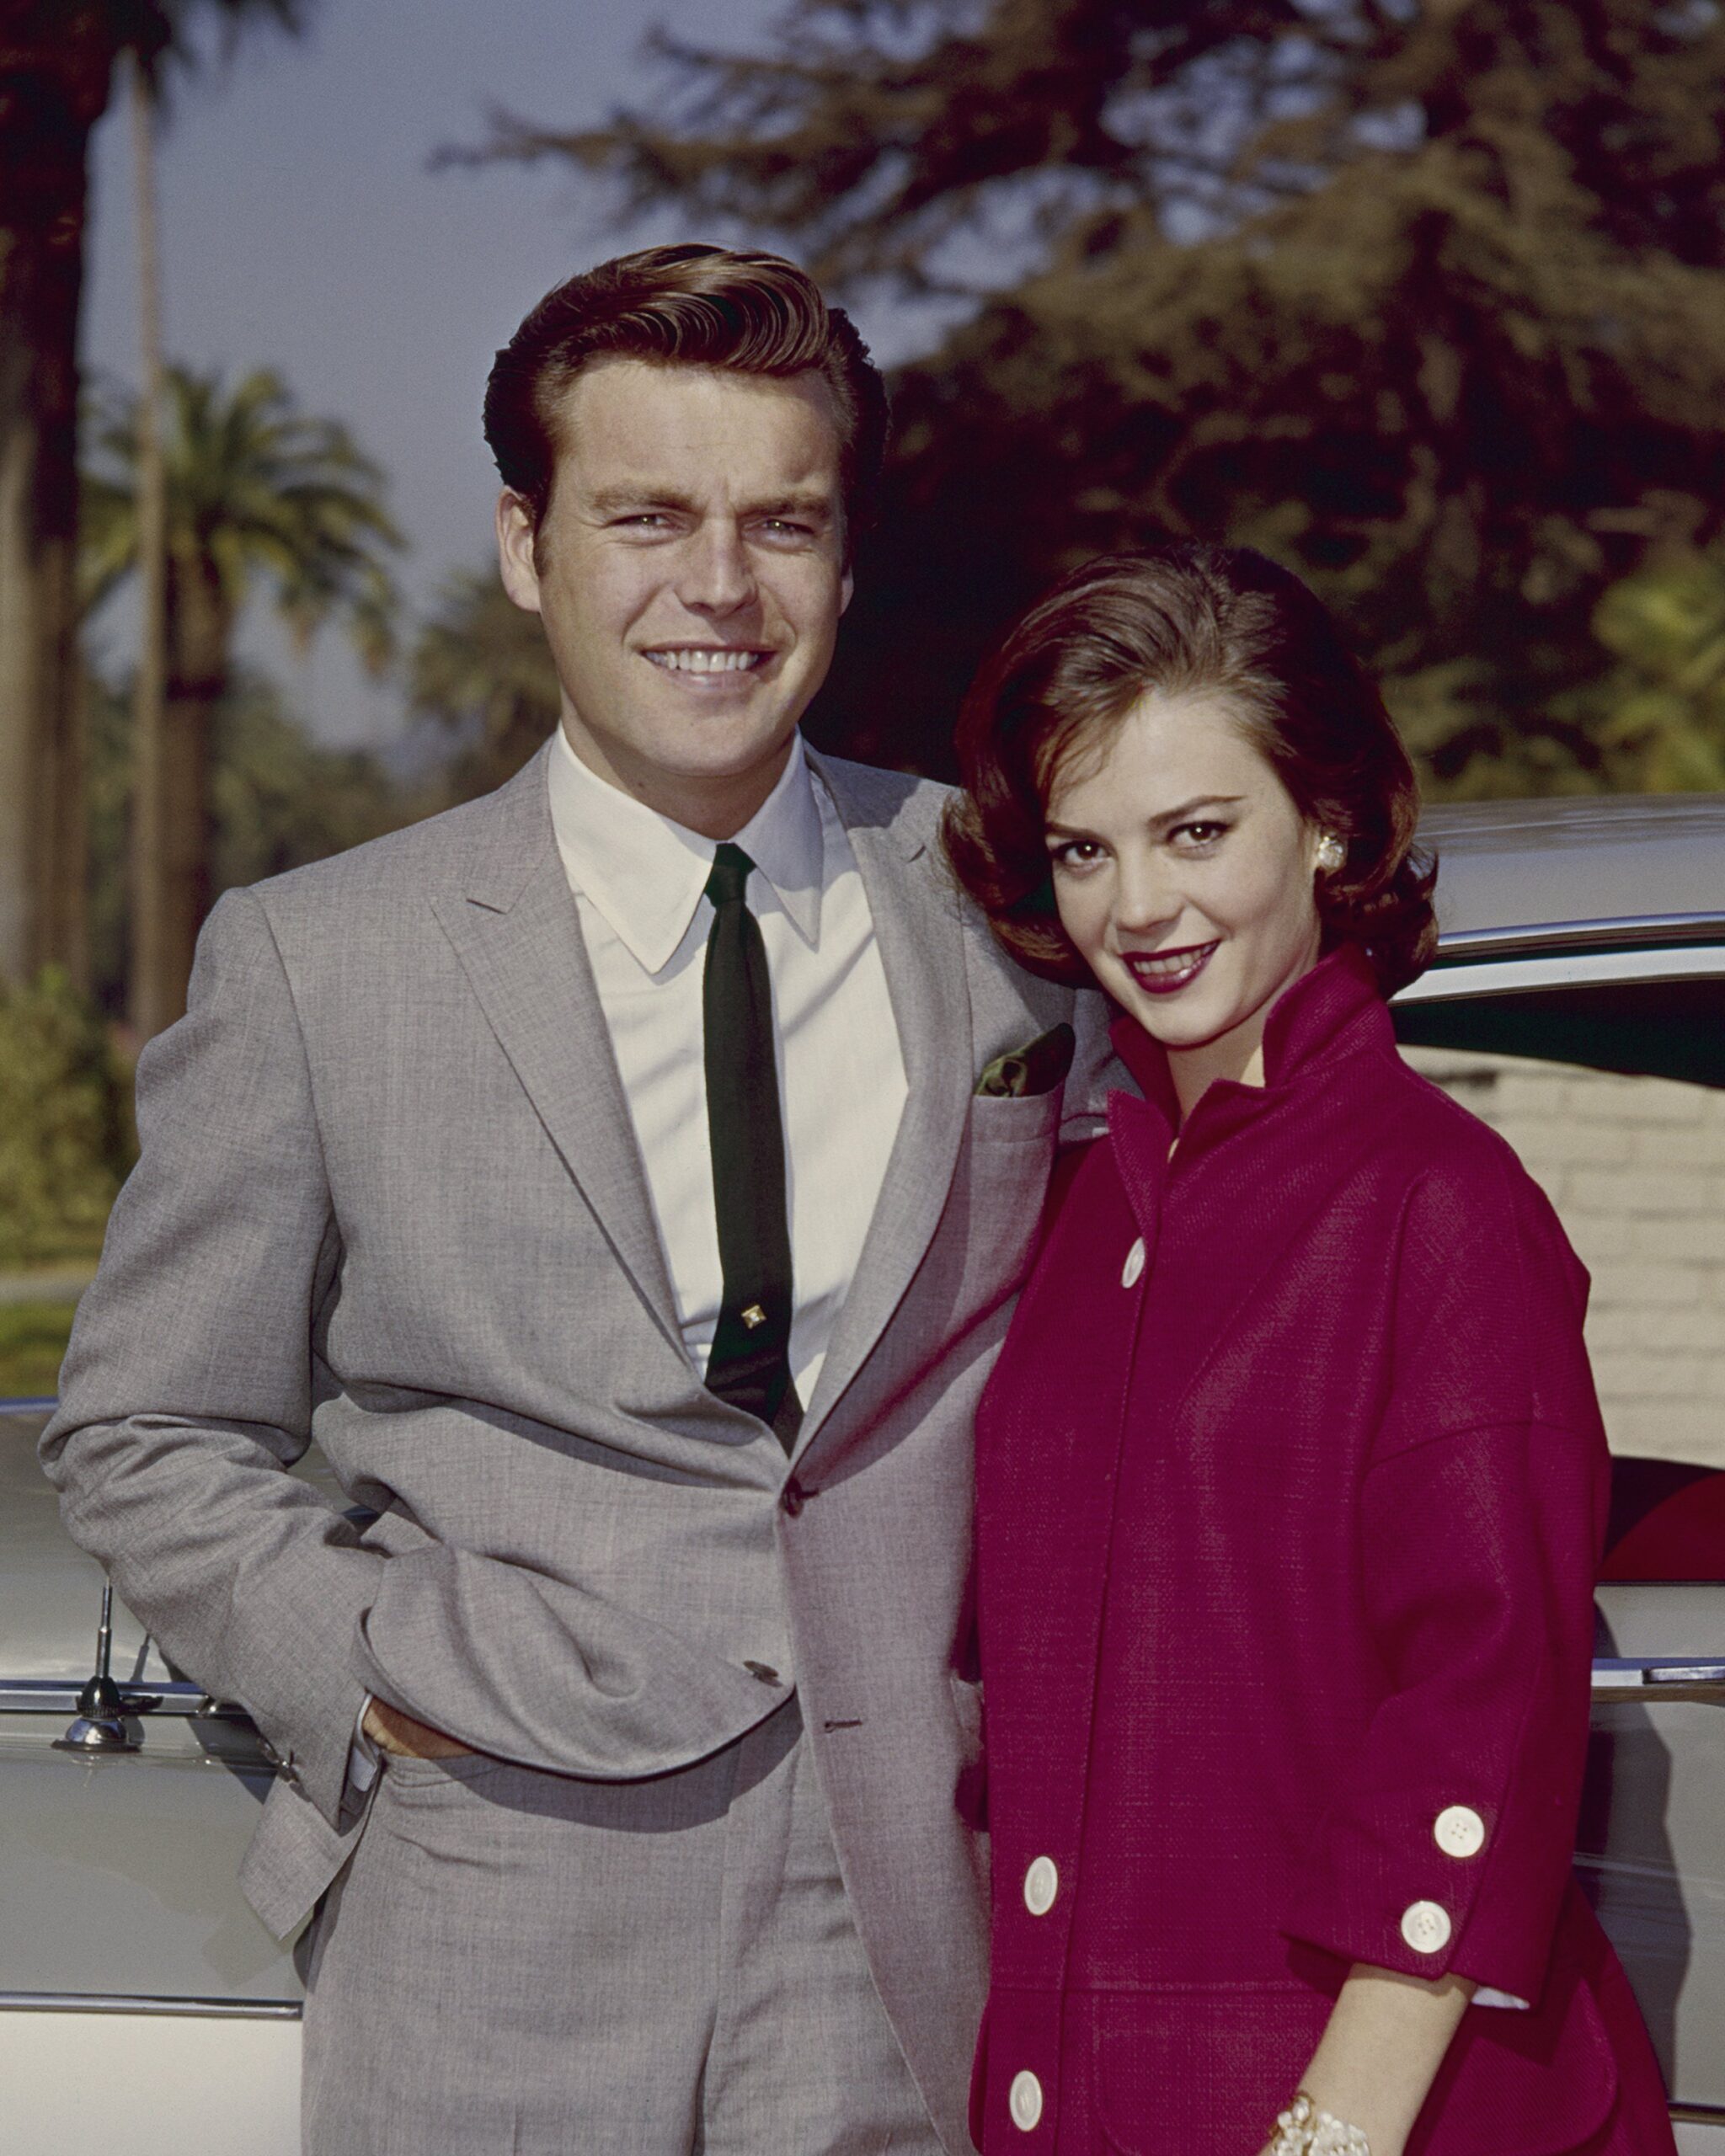 Natalie Wood and Robert Wagner, circa 1960. | Source: Getty Images